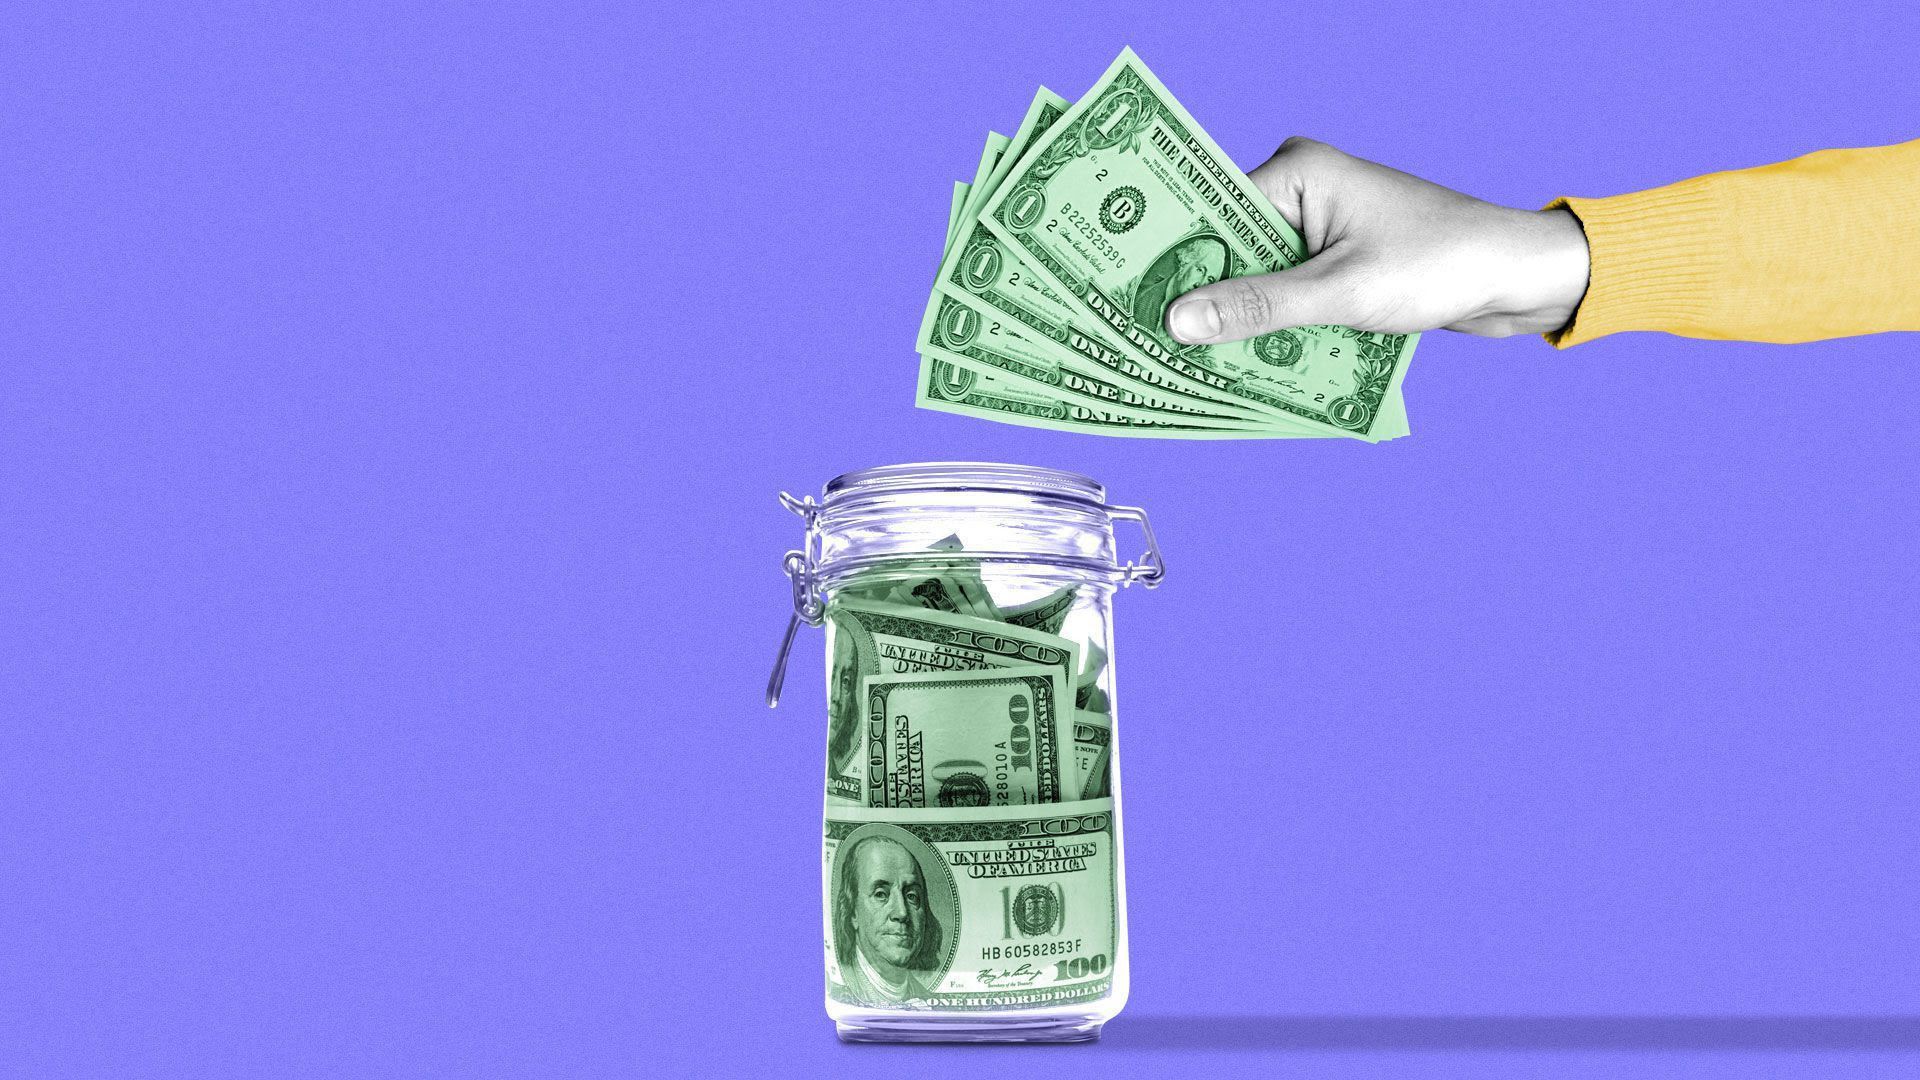 An illustration of someone putting money in a jar.